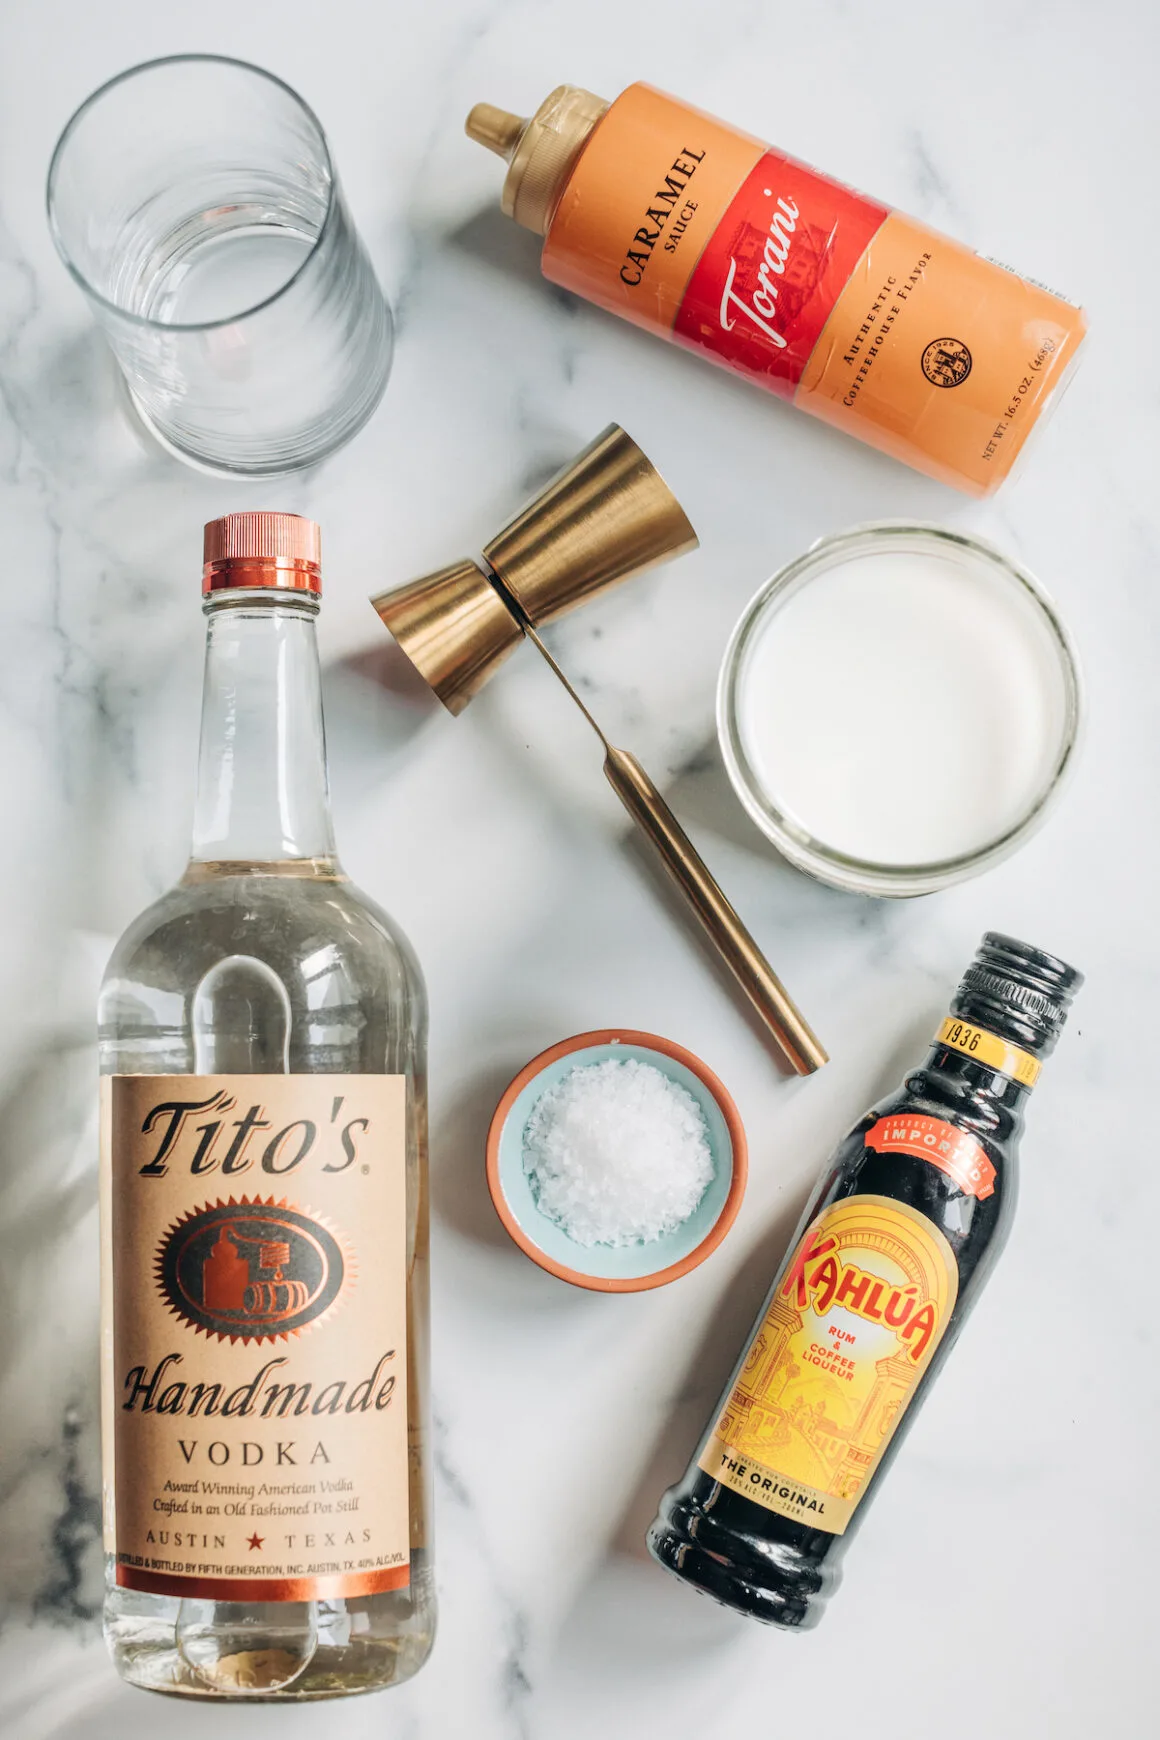 Ingredients to make a salted caramel White Russian cocktail including Tito's vodka and Kahlua